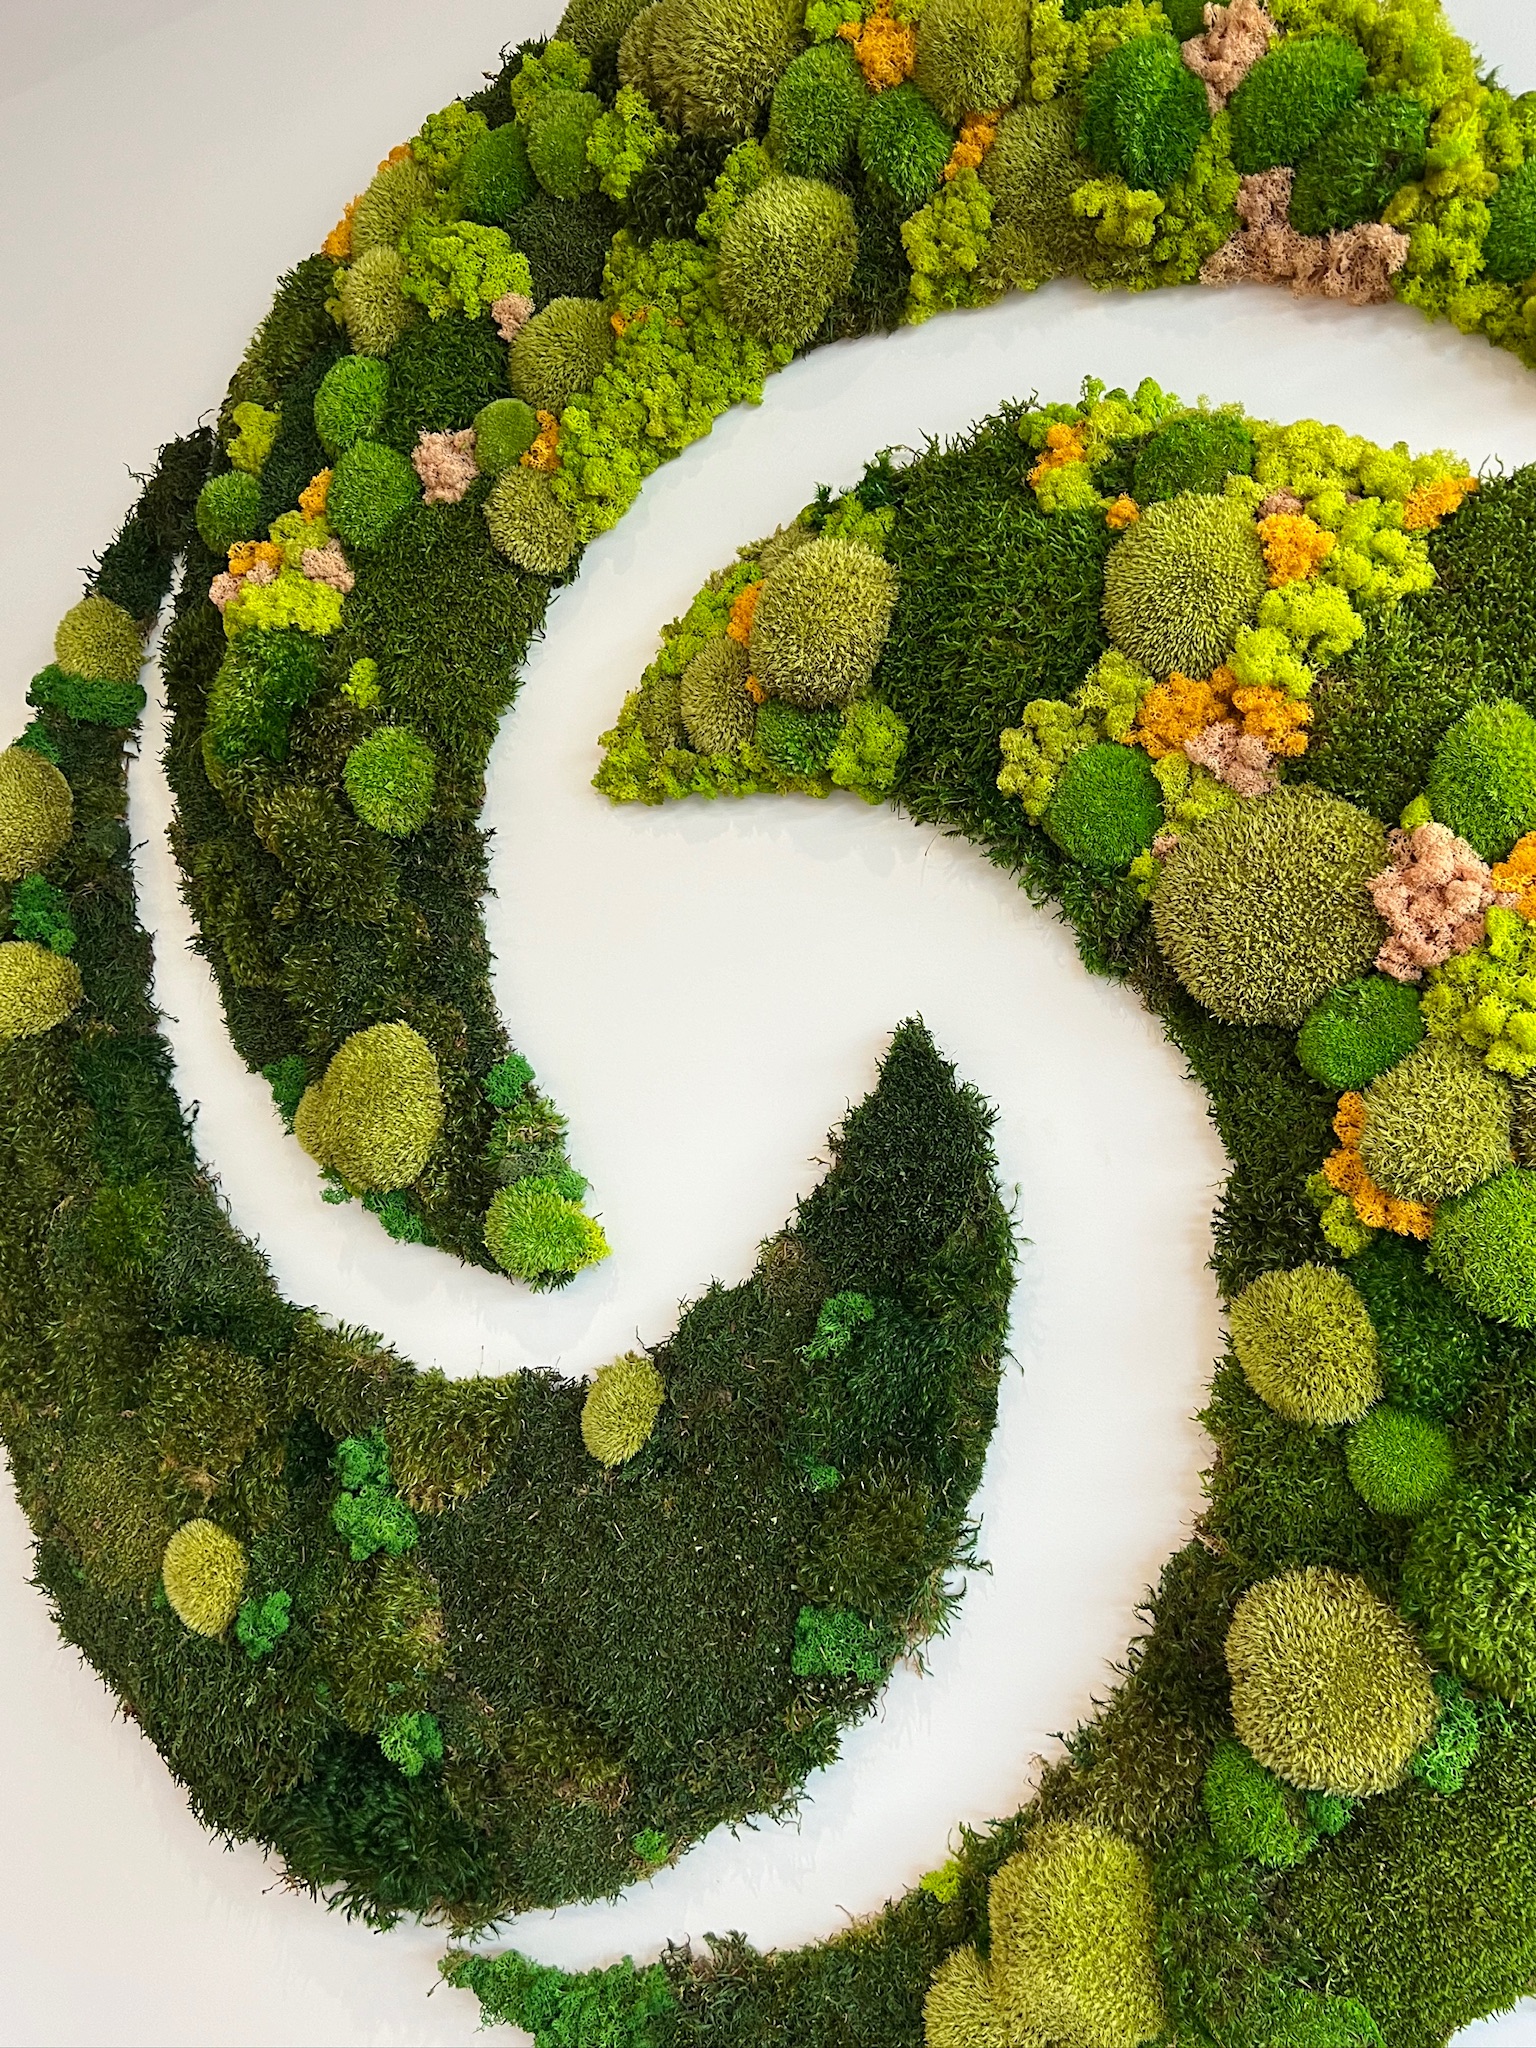 New moss wall instillation with varying colors and textures.